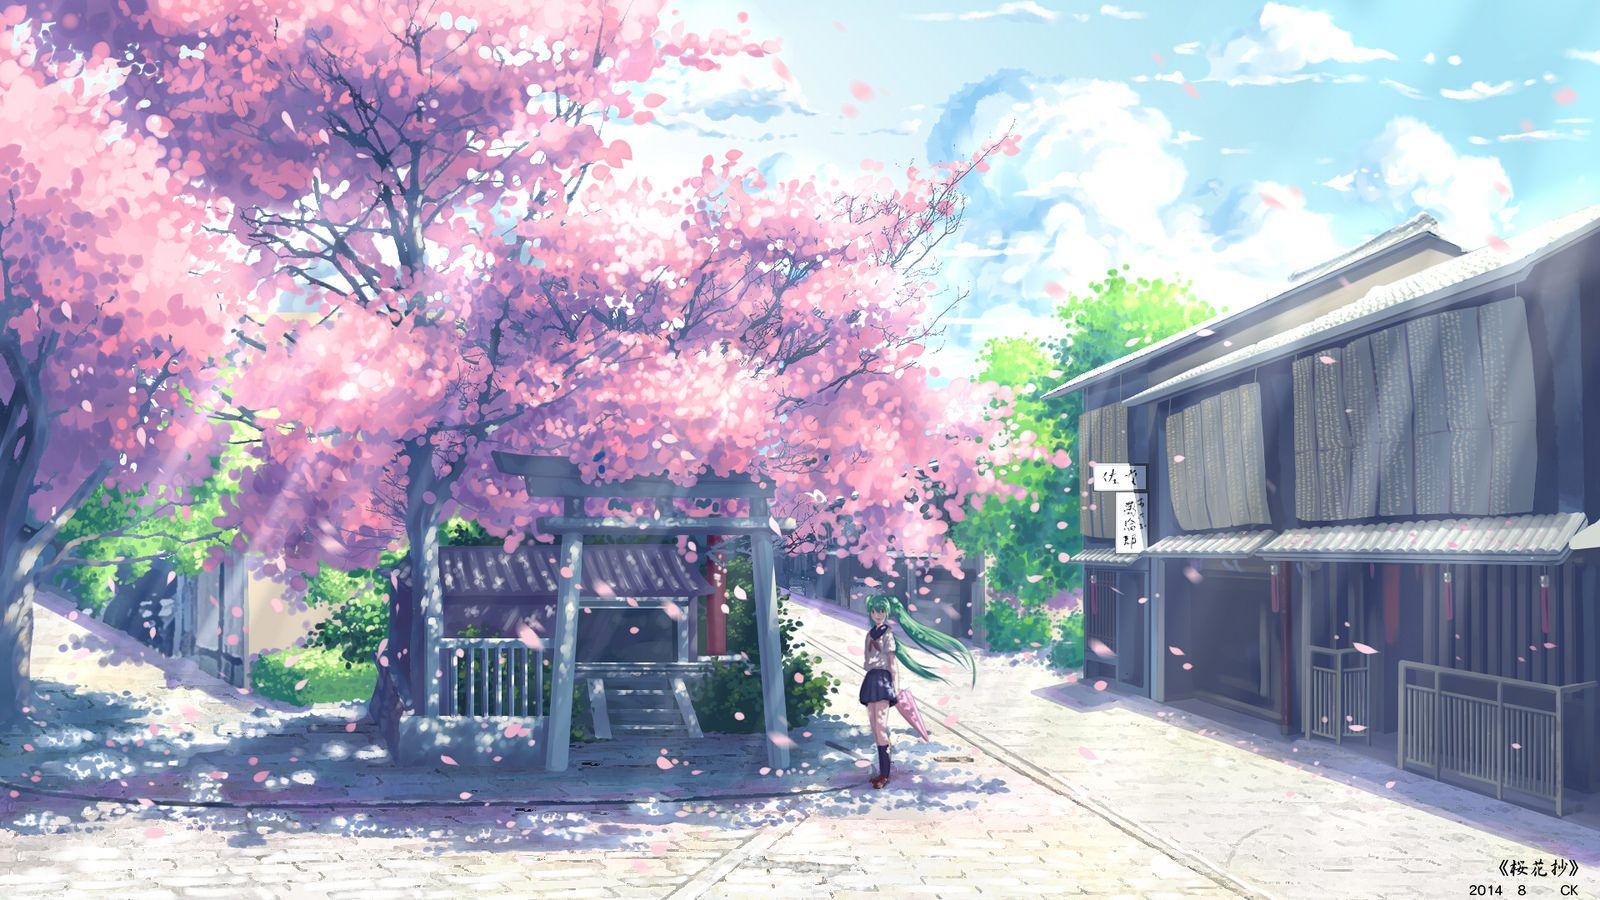 Anime Scenery Cherry Blossoms Background Hd Image